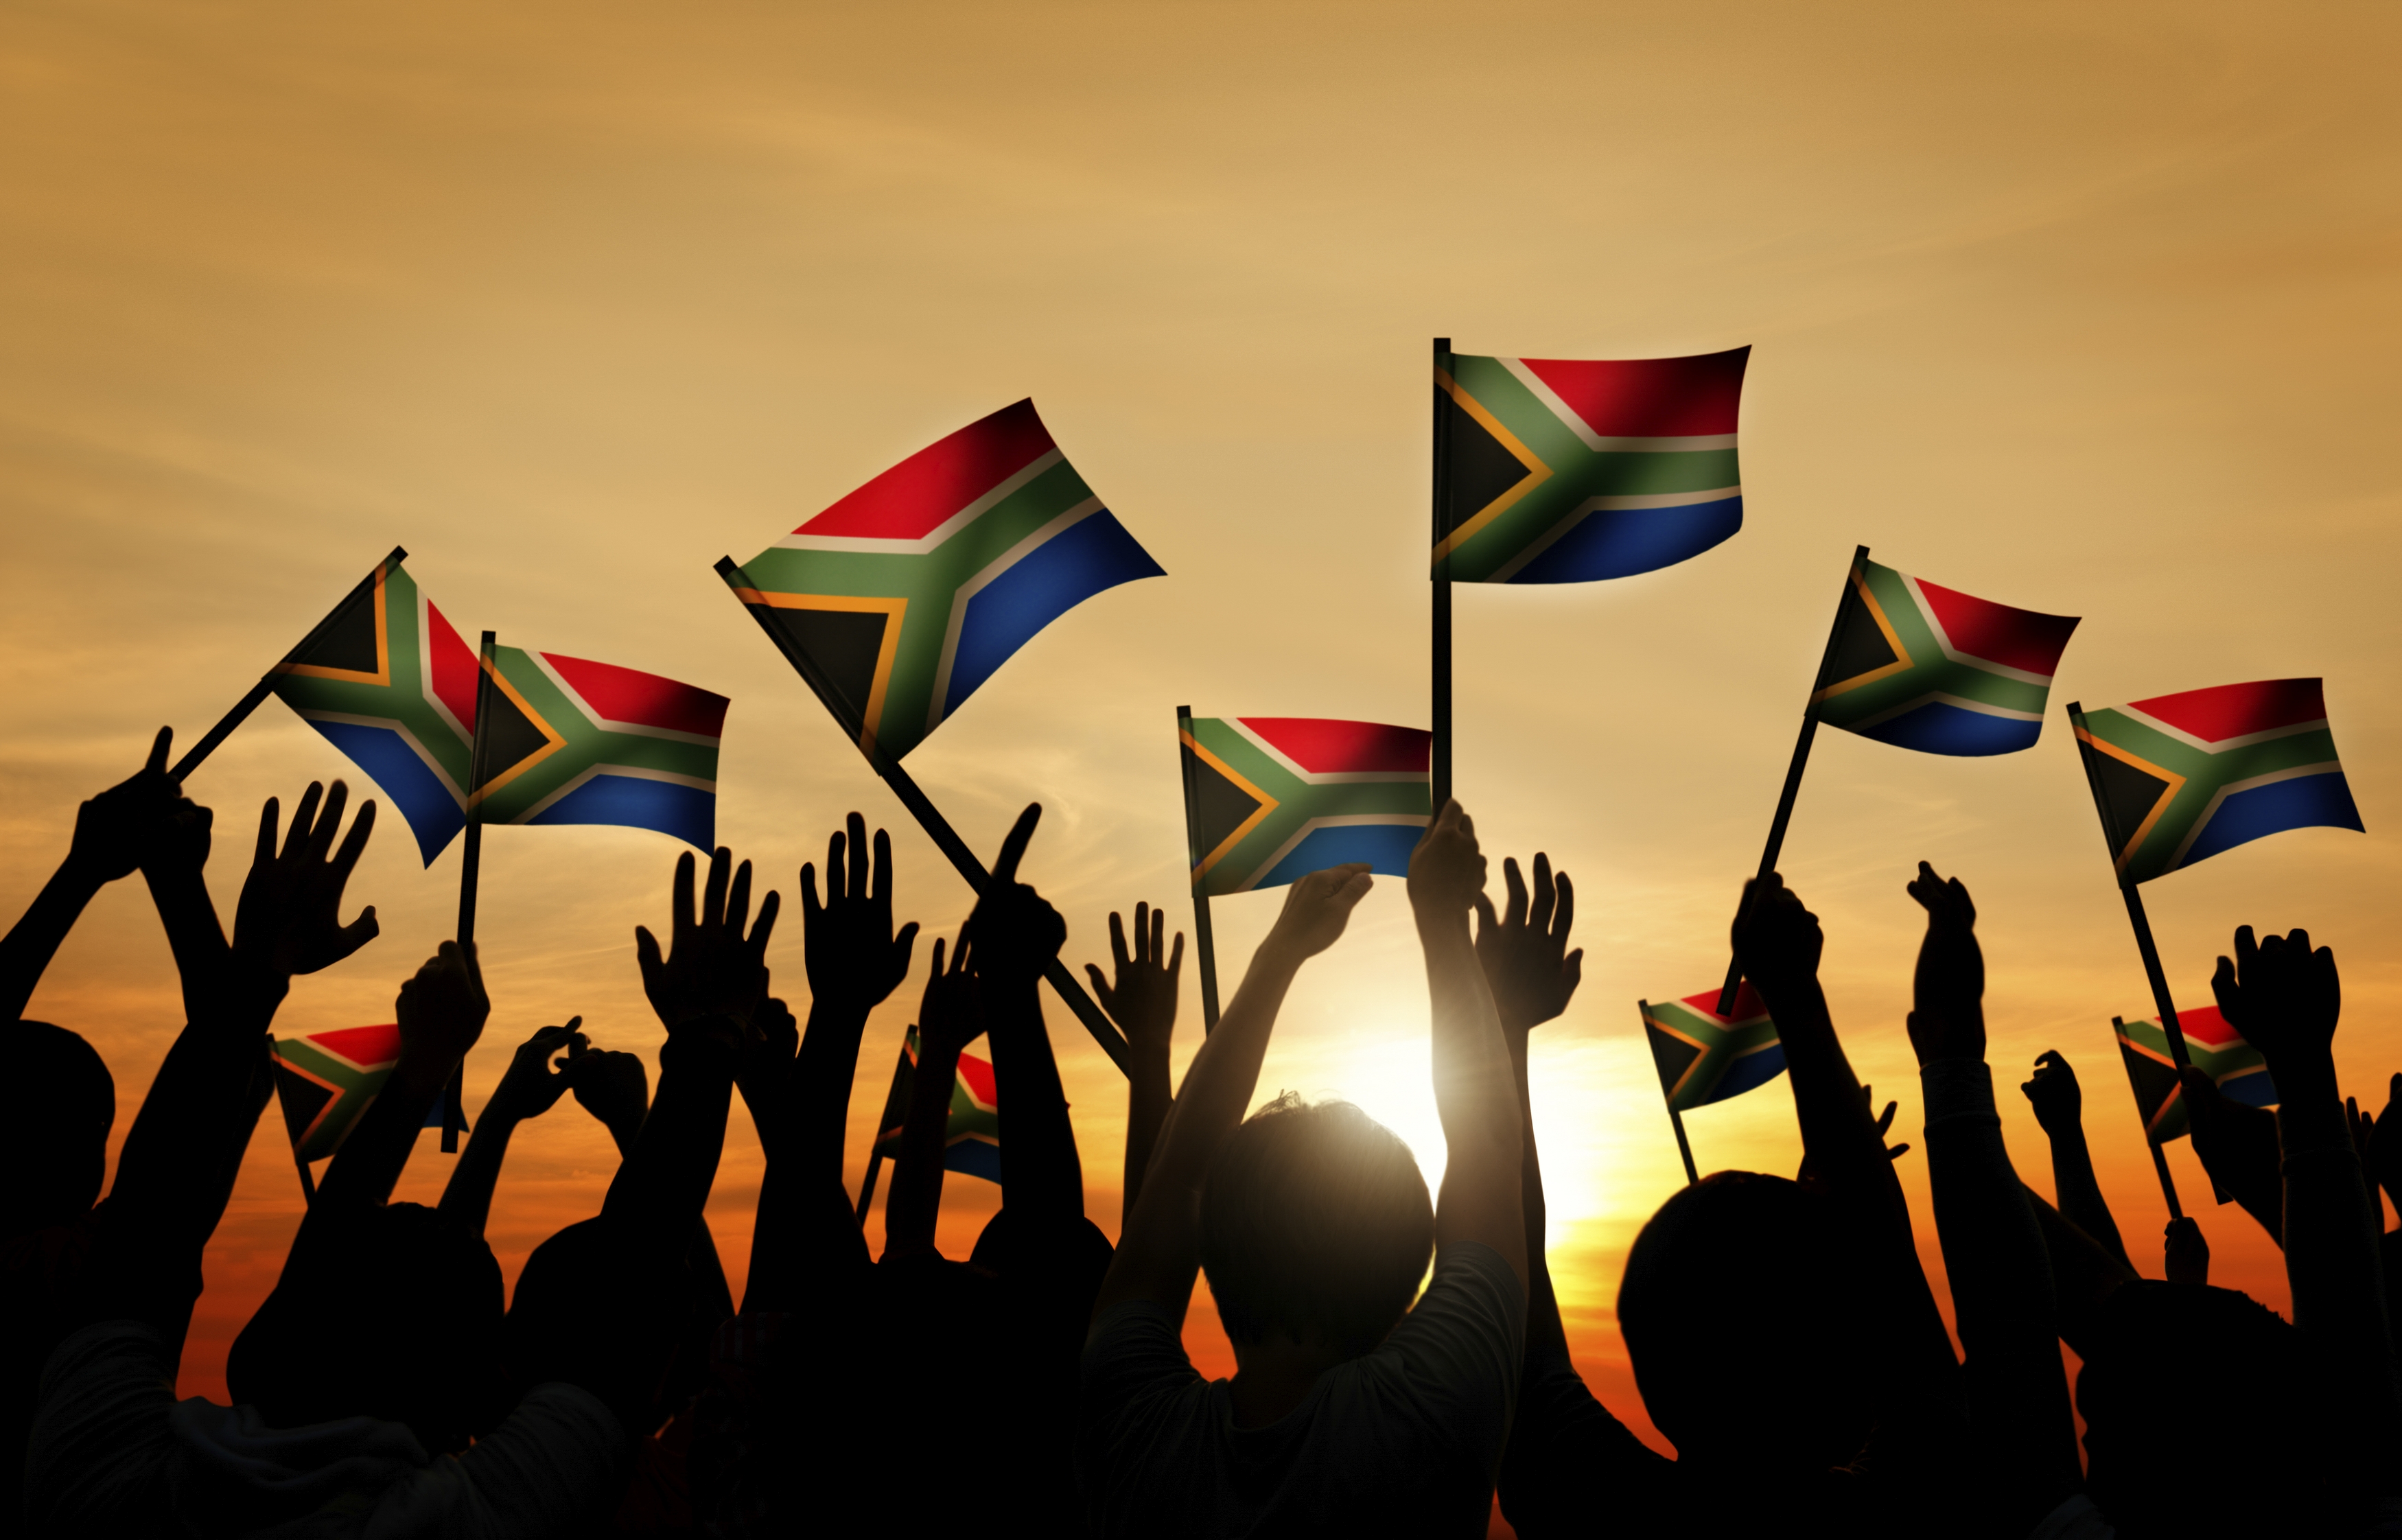 A group of silhouettes holding up South African flags as the sun sets 